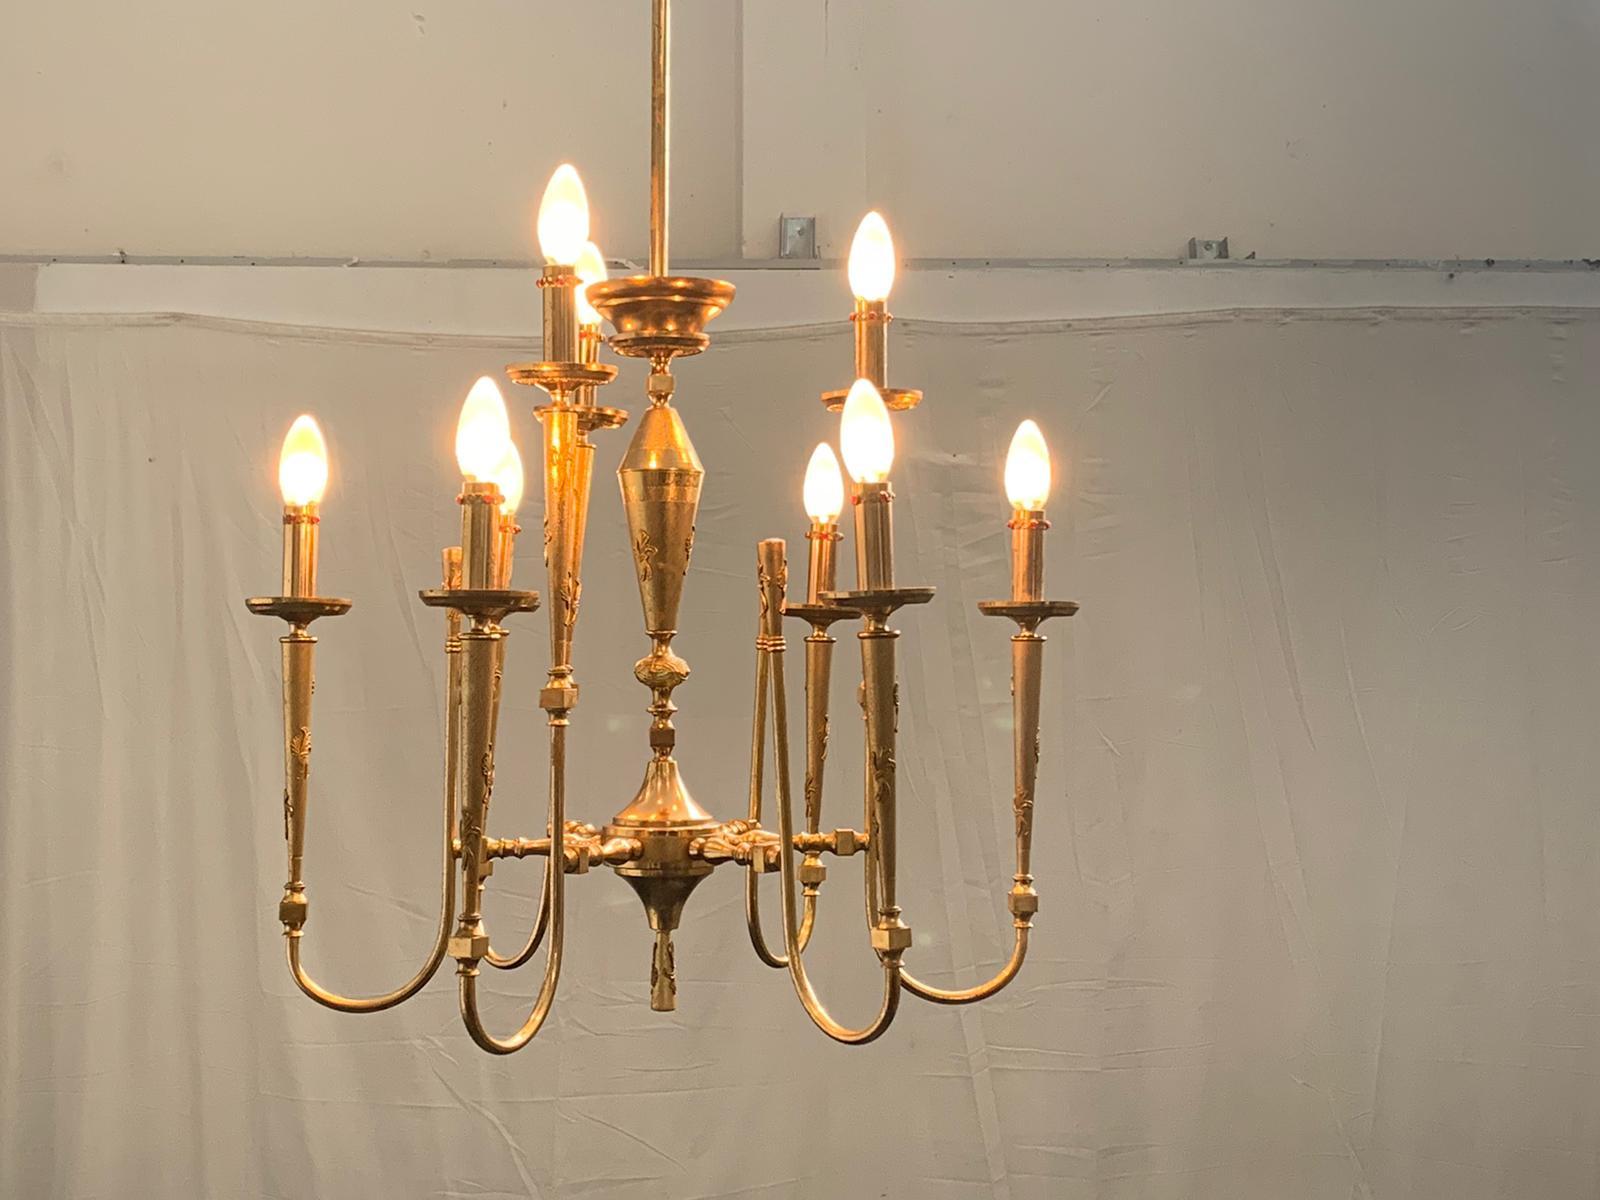 Pendant chandelier in worked and gilded brass. 8 arms, candle covers and fragments brought in gilded brass, inserts of similar gems Italy 50's.
Packaging with bubble wrap and cardboard boxes is included. If the wooden packaging is needed (fumigated